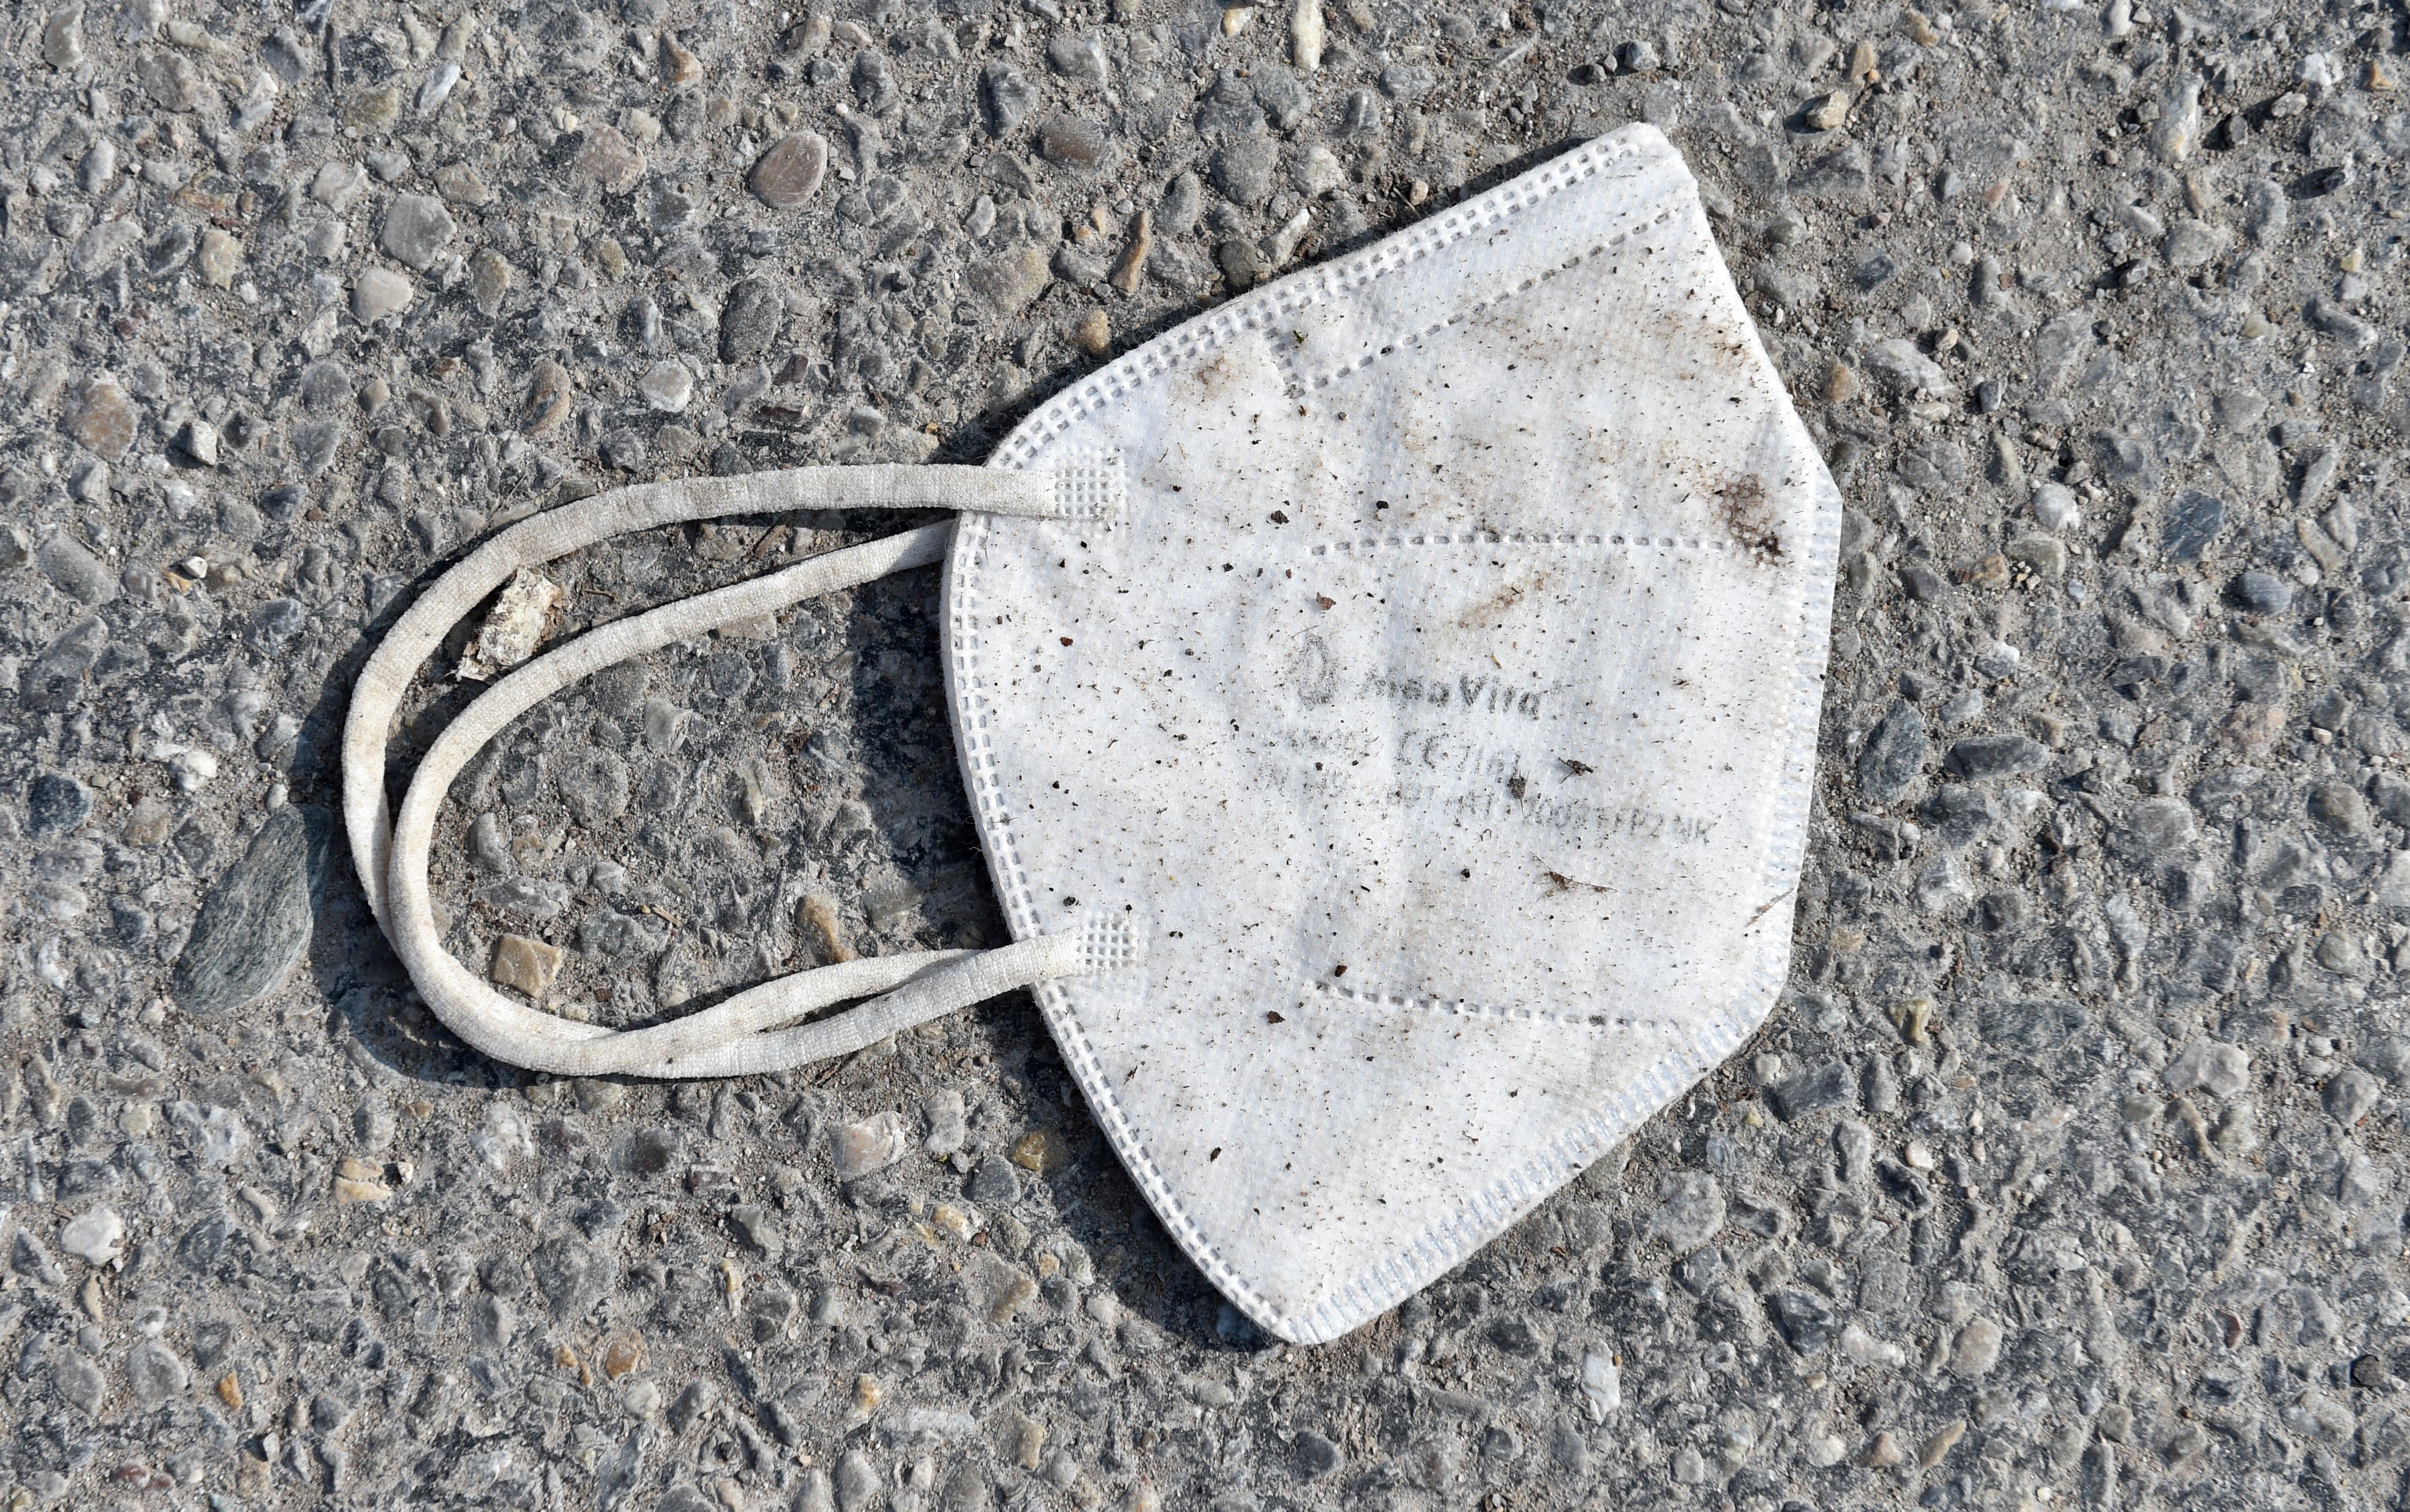 A discarded FFP2 protective face mask lies on a street.